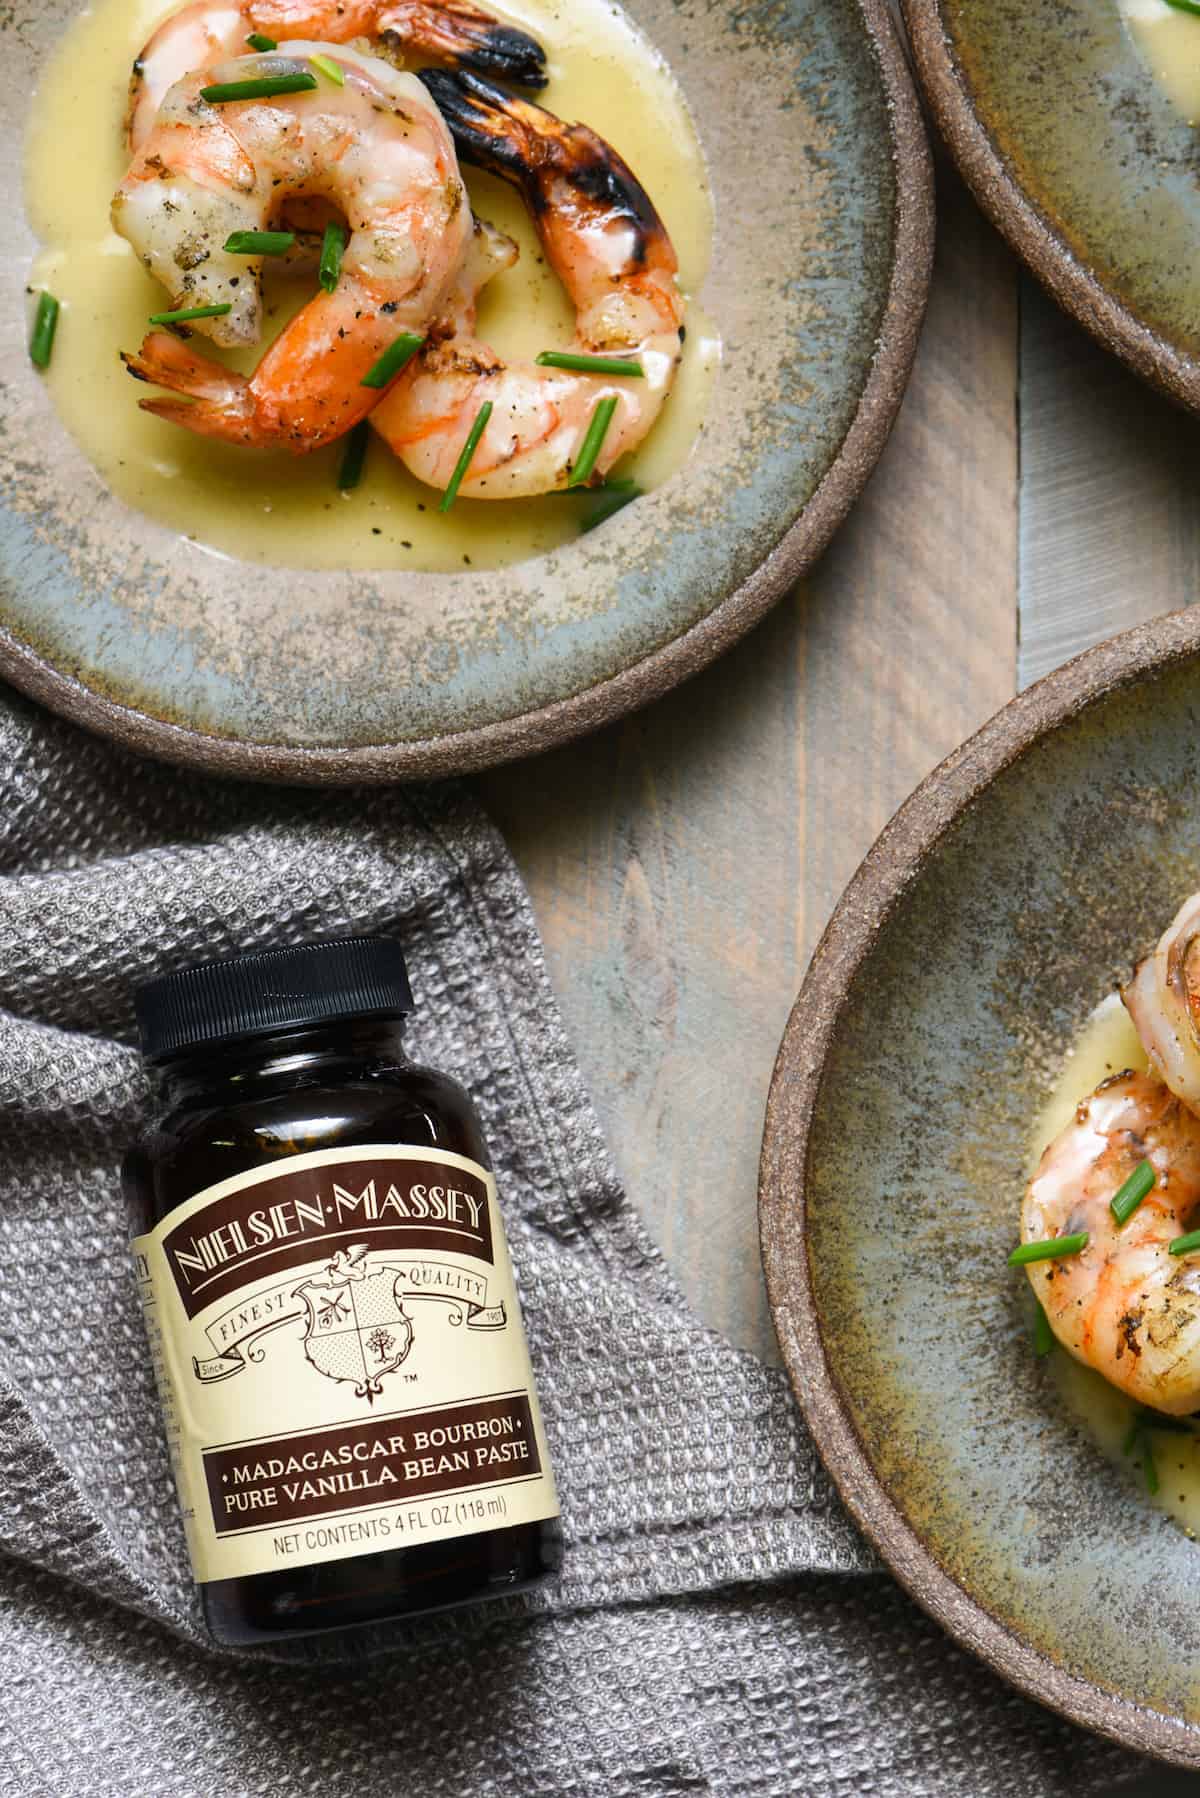 Grilled Shrimp with Vanilla Beurre Blanc - Don't let the fancy French name intimidate you - in just about 20 minutes, you can pull together this elegant summer appetizer! | foxeslovelemons.com